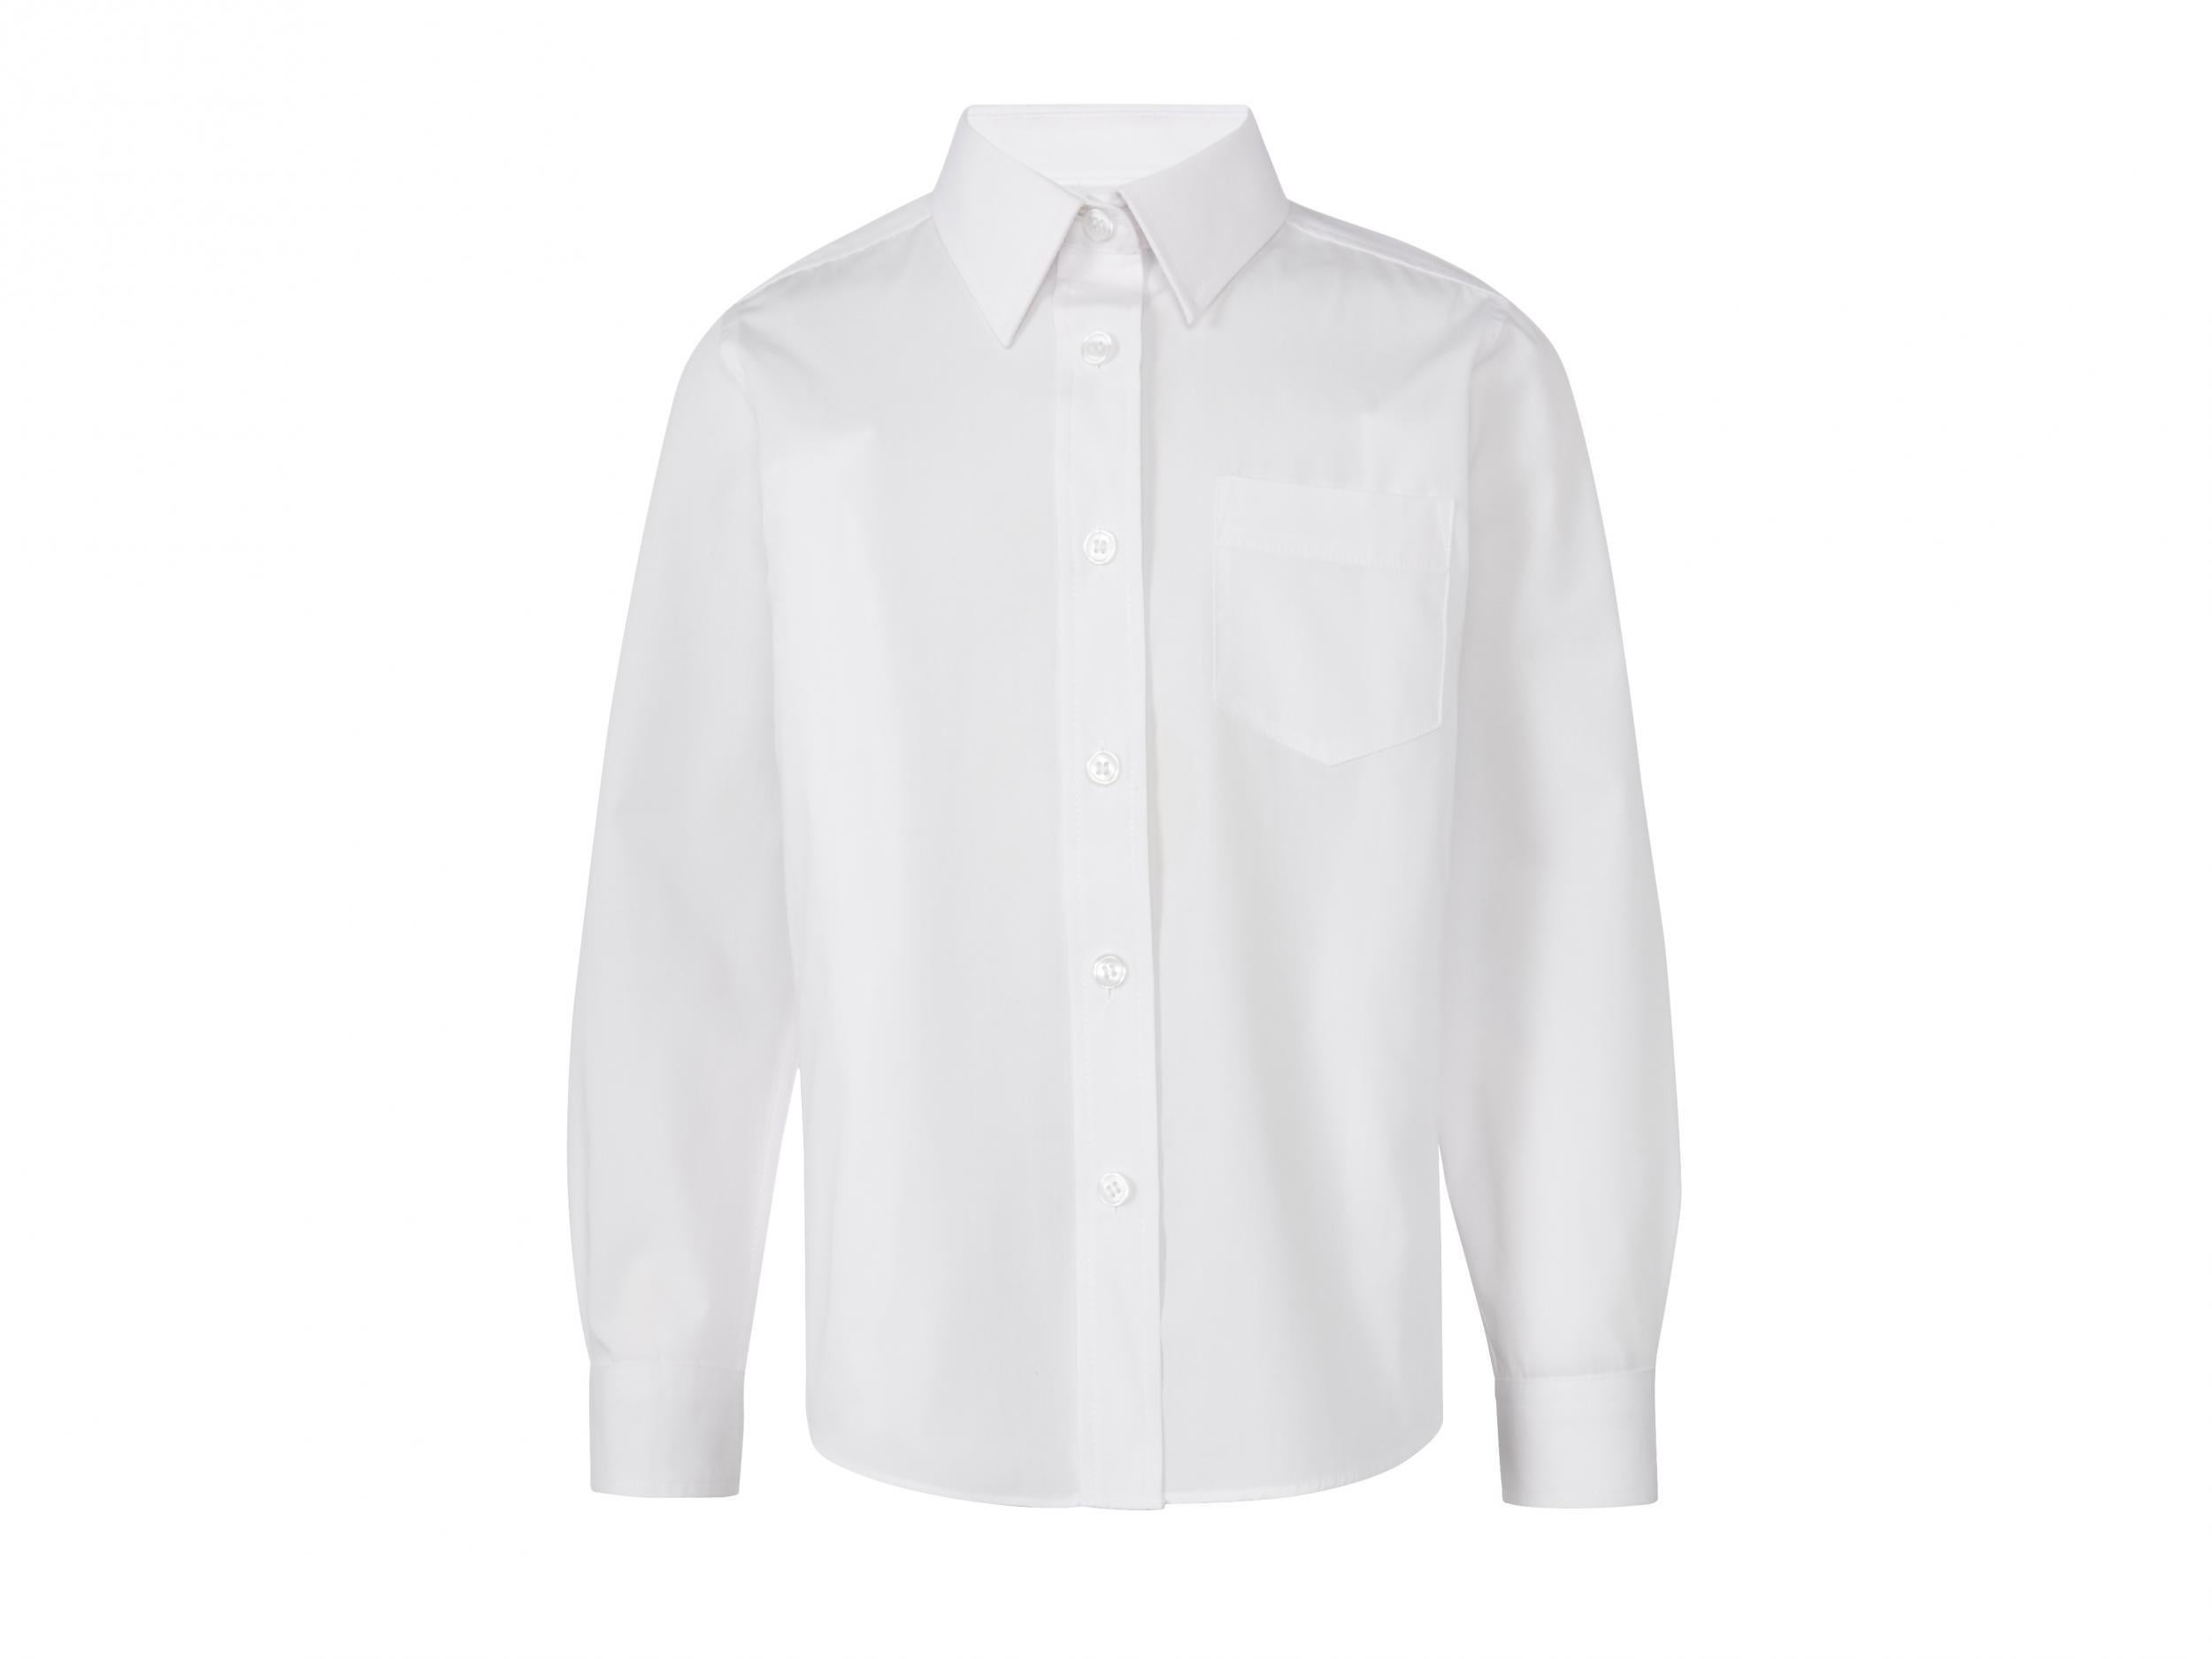 Ages 3-13 Years 2 Pack of School Uniform Shirts for Boys and Girls M&Co Unisex Long Sleeved White Shirt 